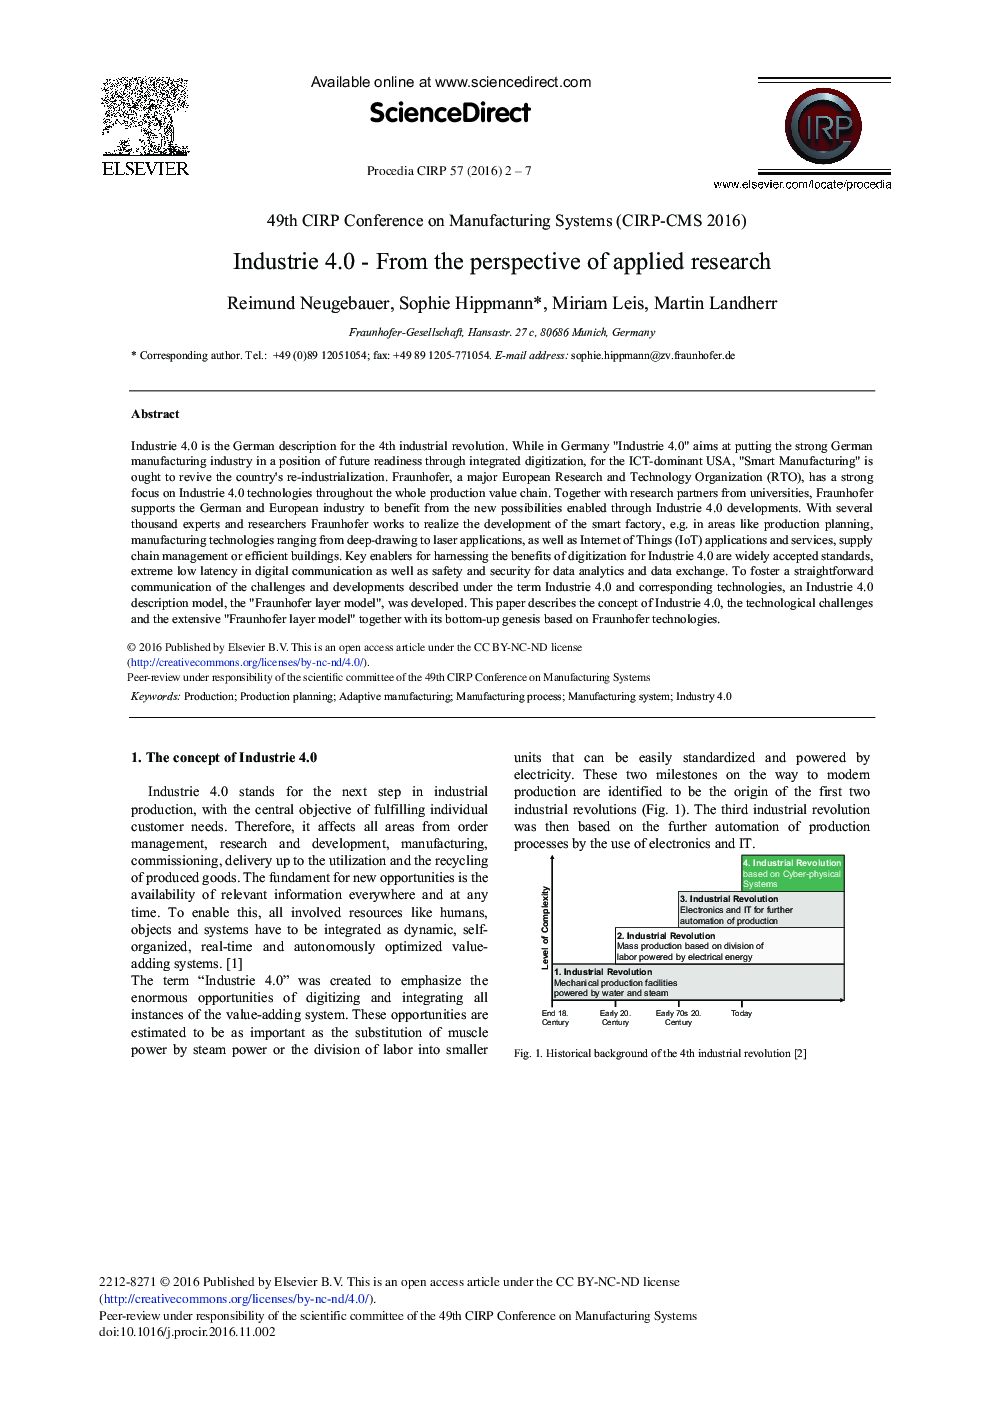 Industrie 4.0 - From the Perspective of Applied Research